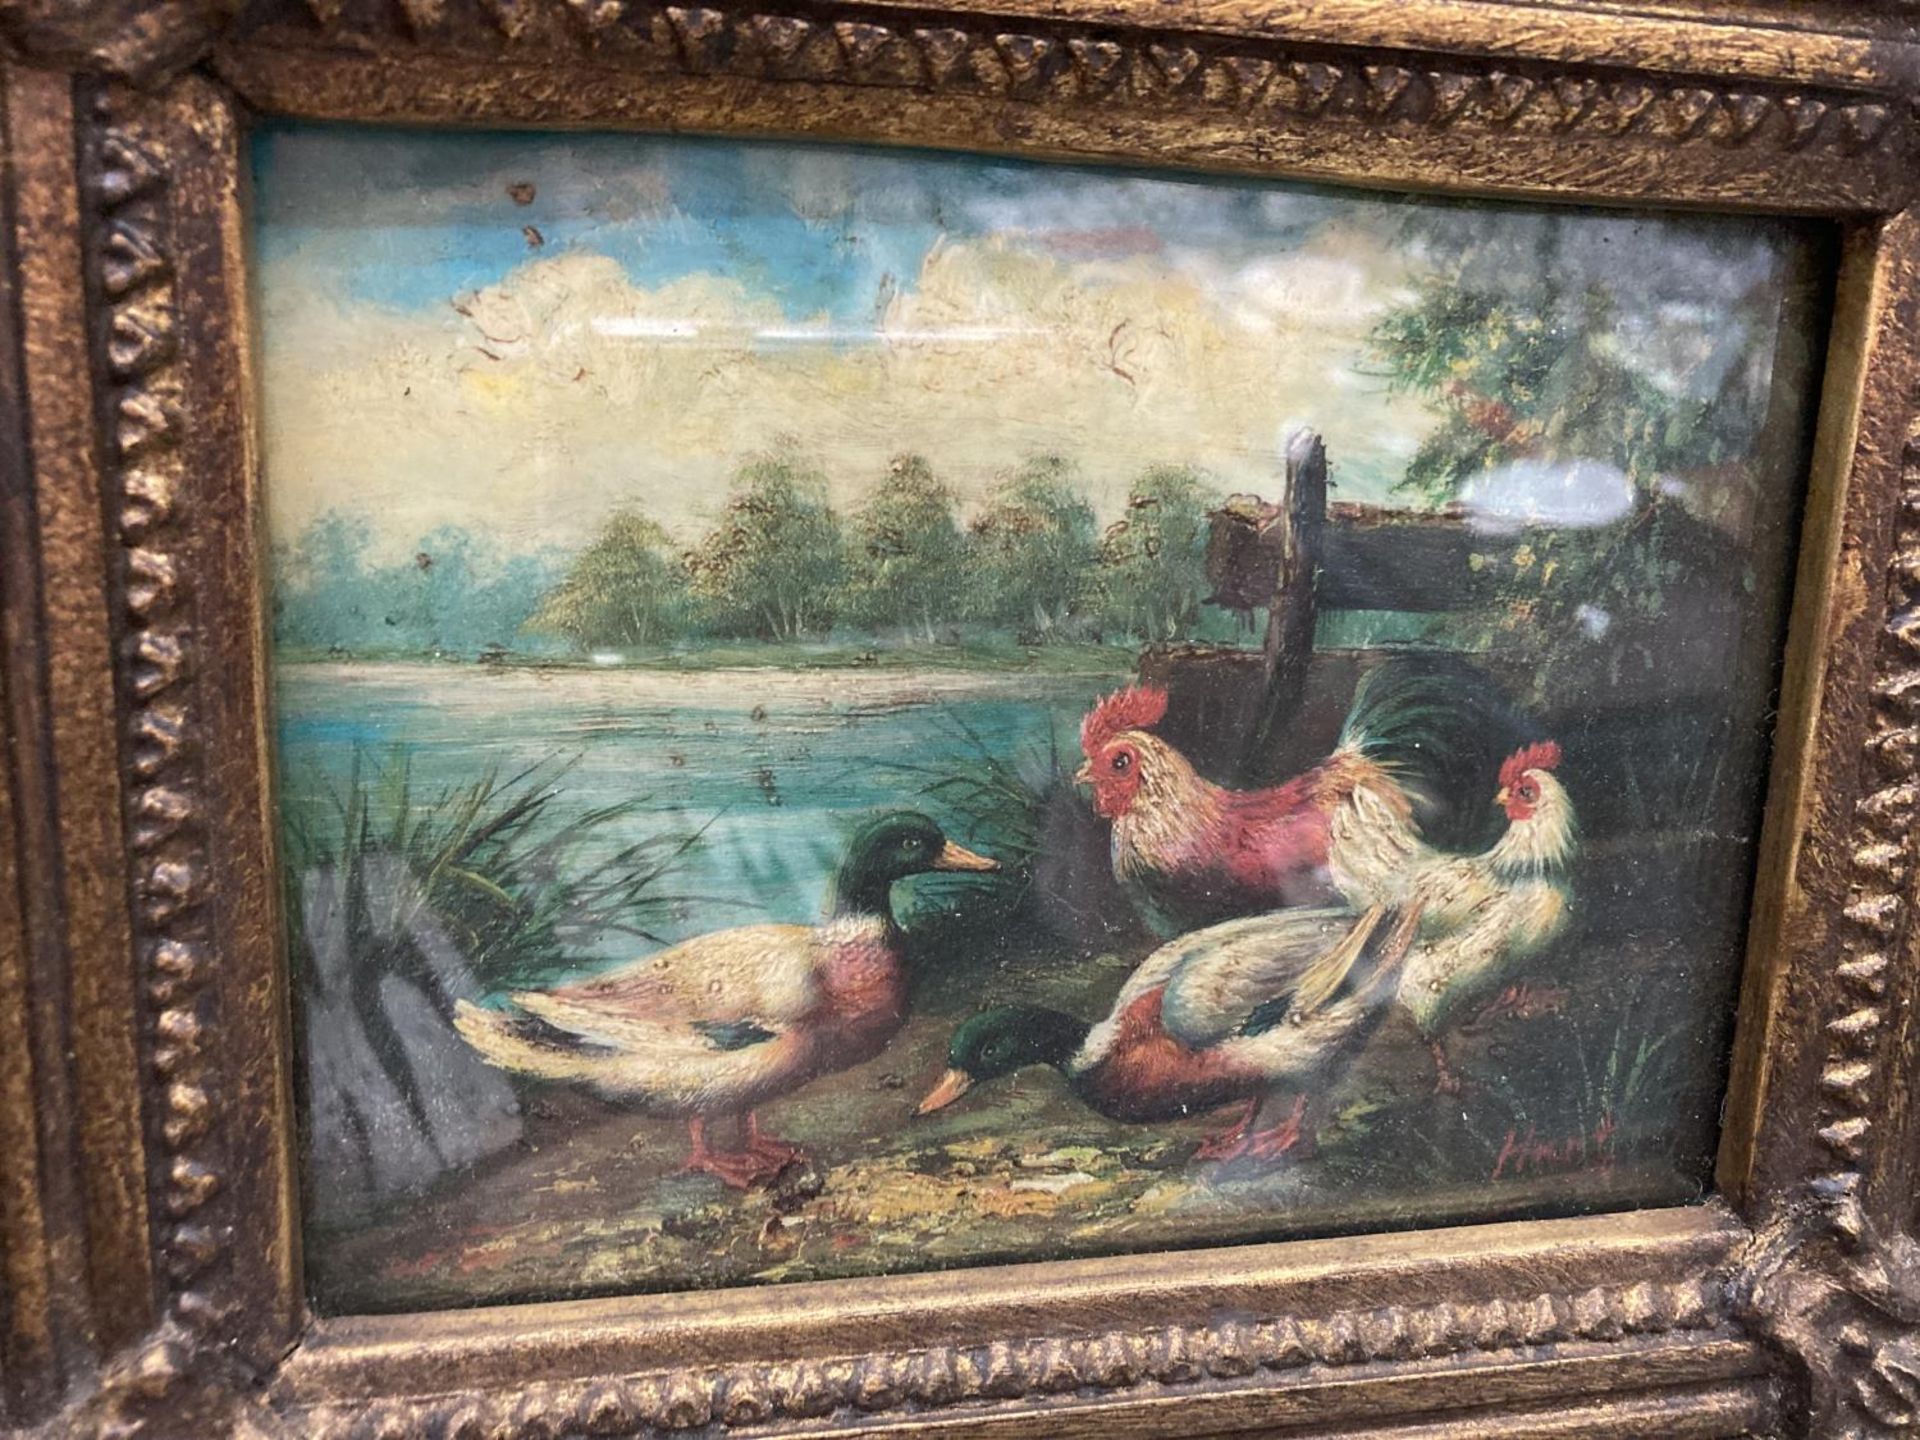 AN OLEOGRAPH IN ORNATE FRAME DEPICTING DUCKS AND CHICKENS SIGNED BY EDGAR HUNT 1876 - 1953 - Image 2 of 4